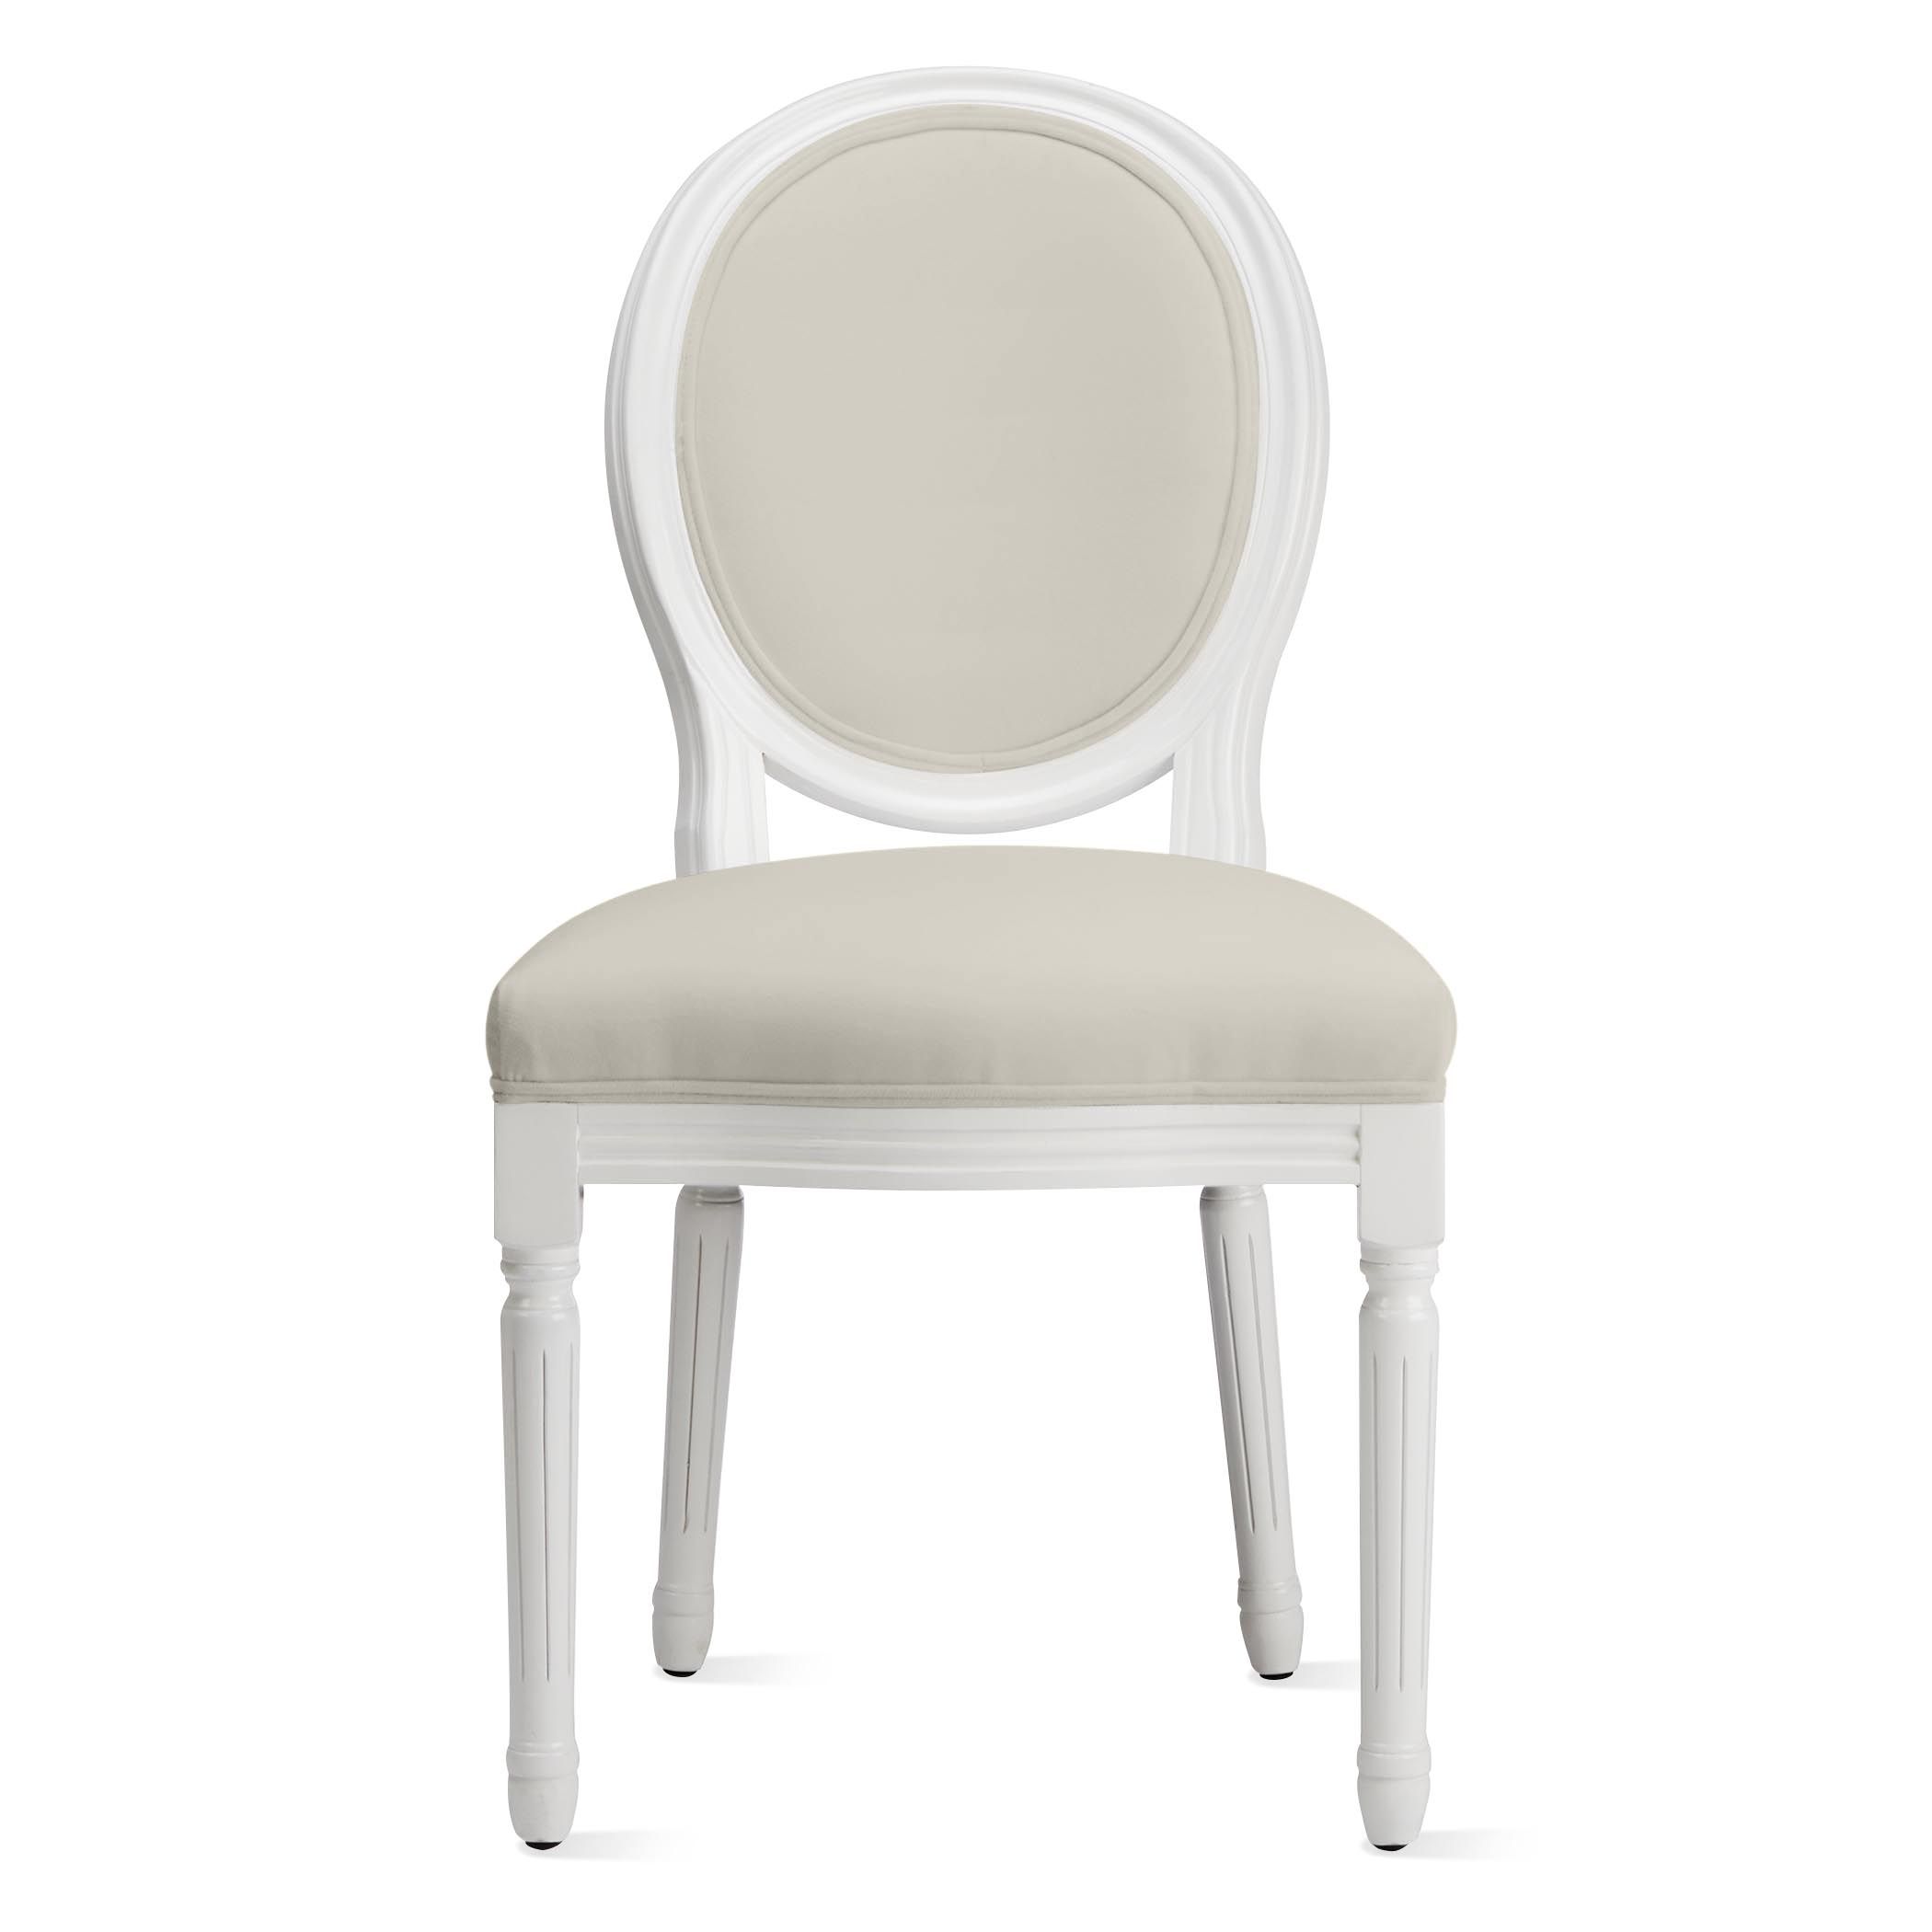 Camille Dining Chair - High Gloss White | Z Gallerie